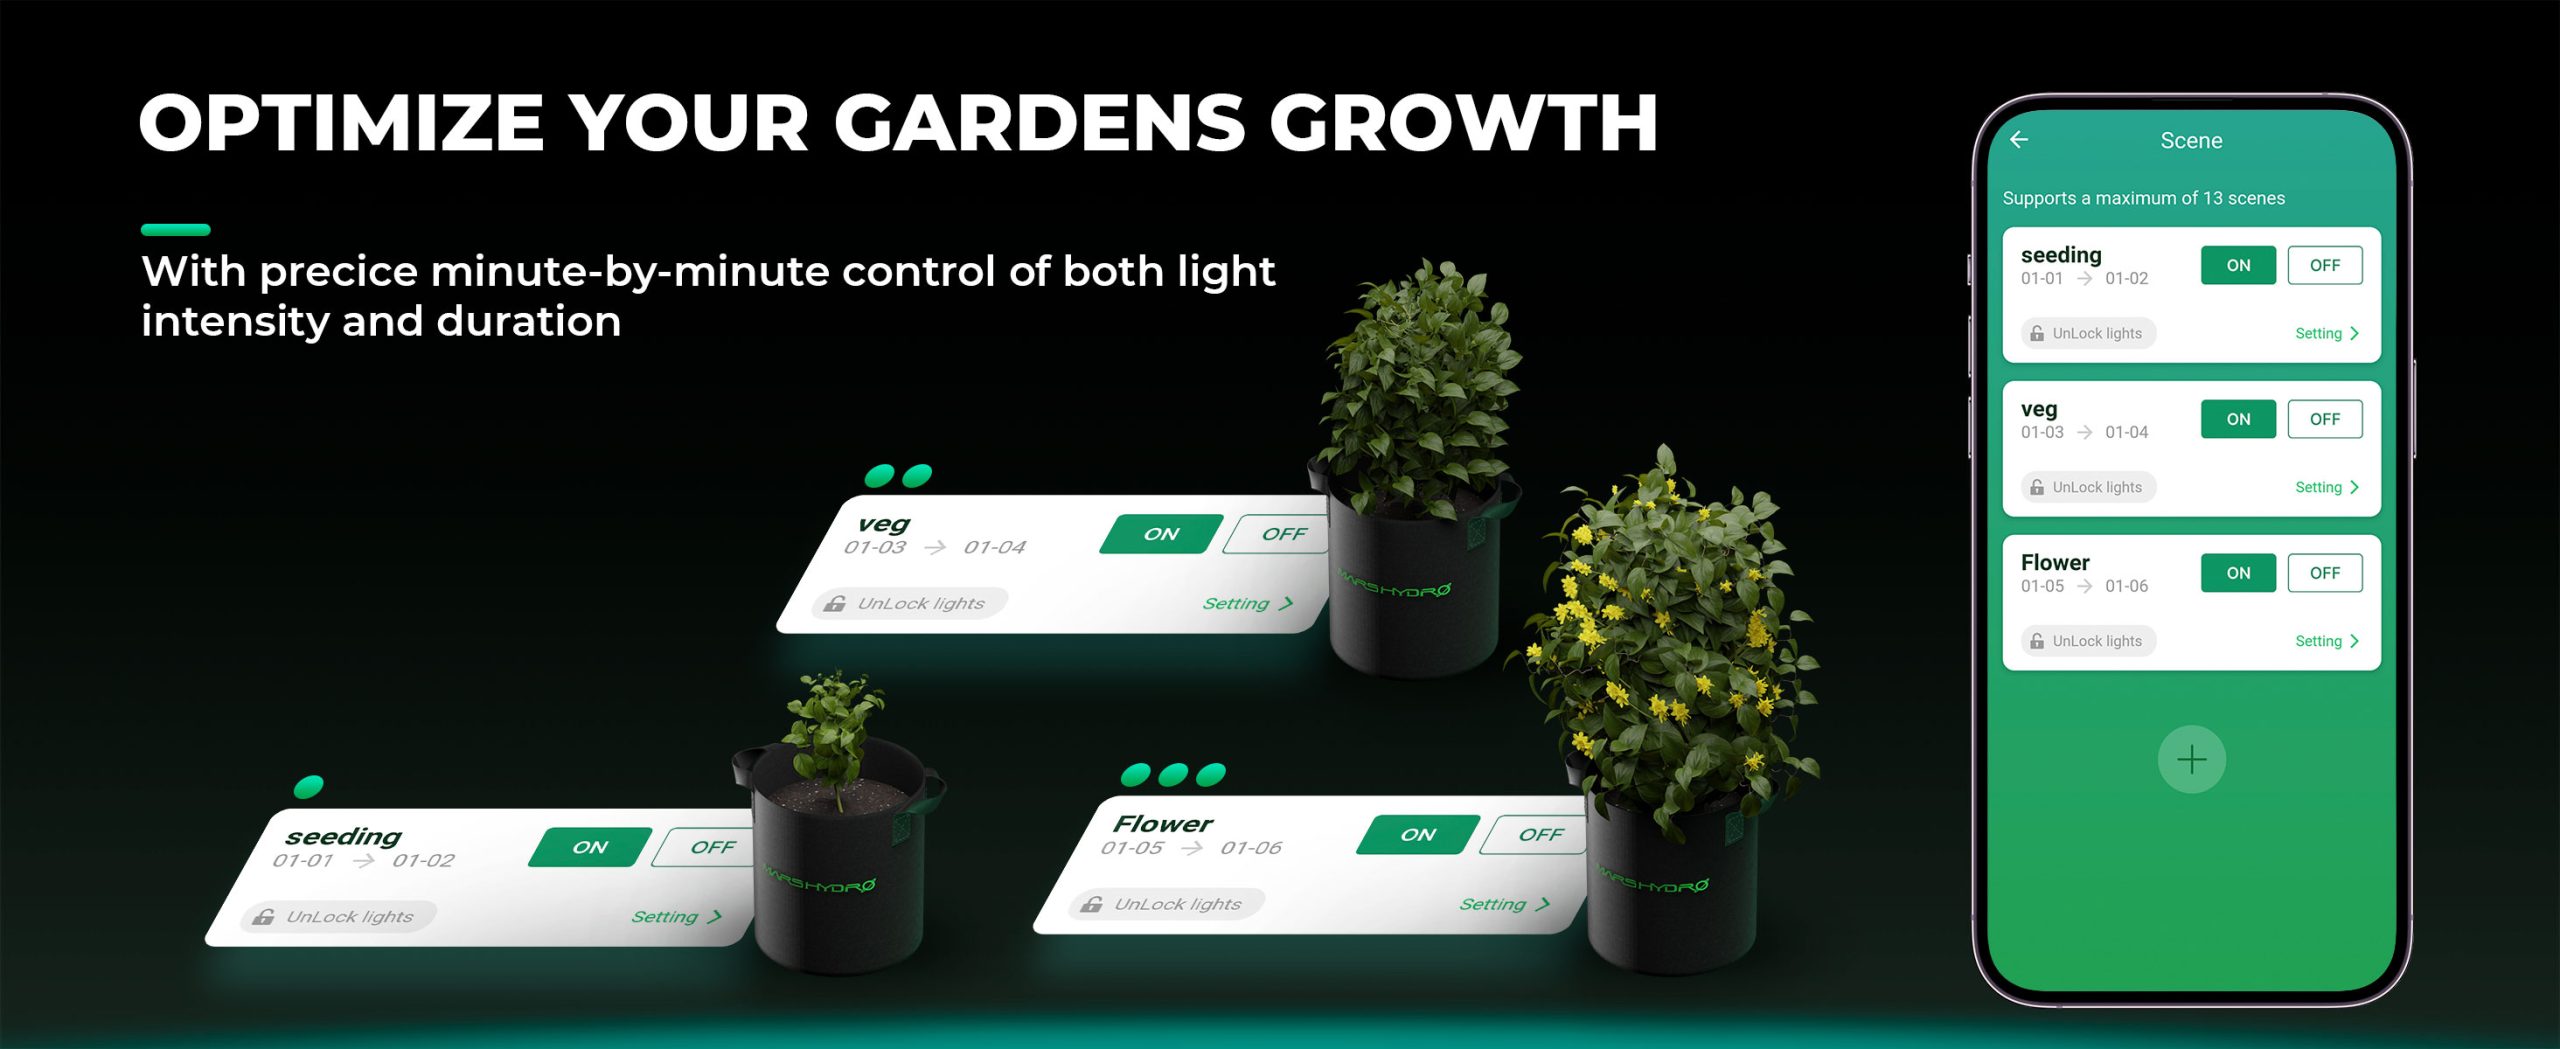 OPTIMIZE YOUR GARDENS GROWTH WITH MARS HYDRO SMART LED GROW LIGHT